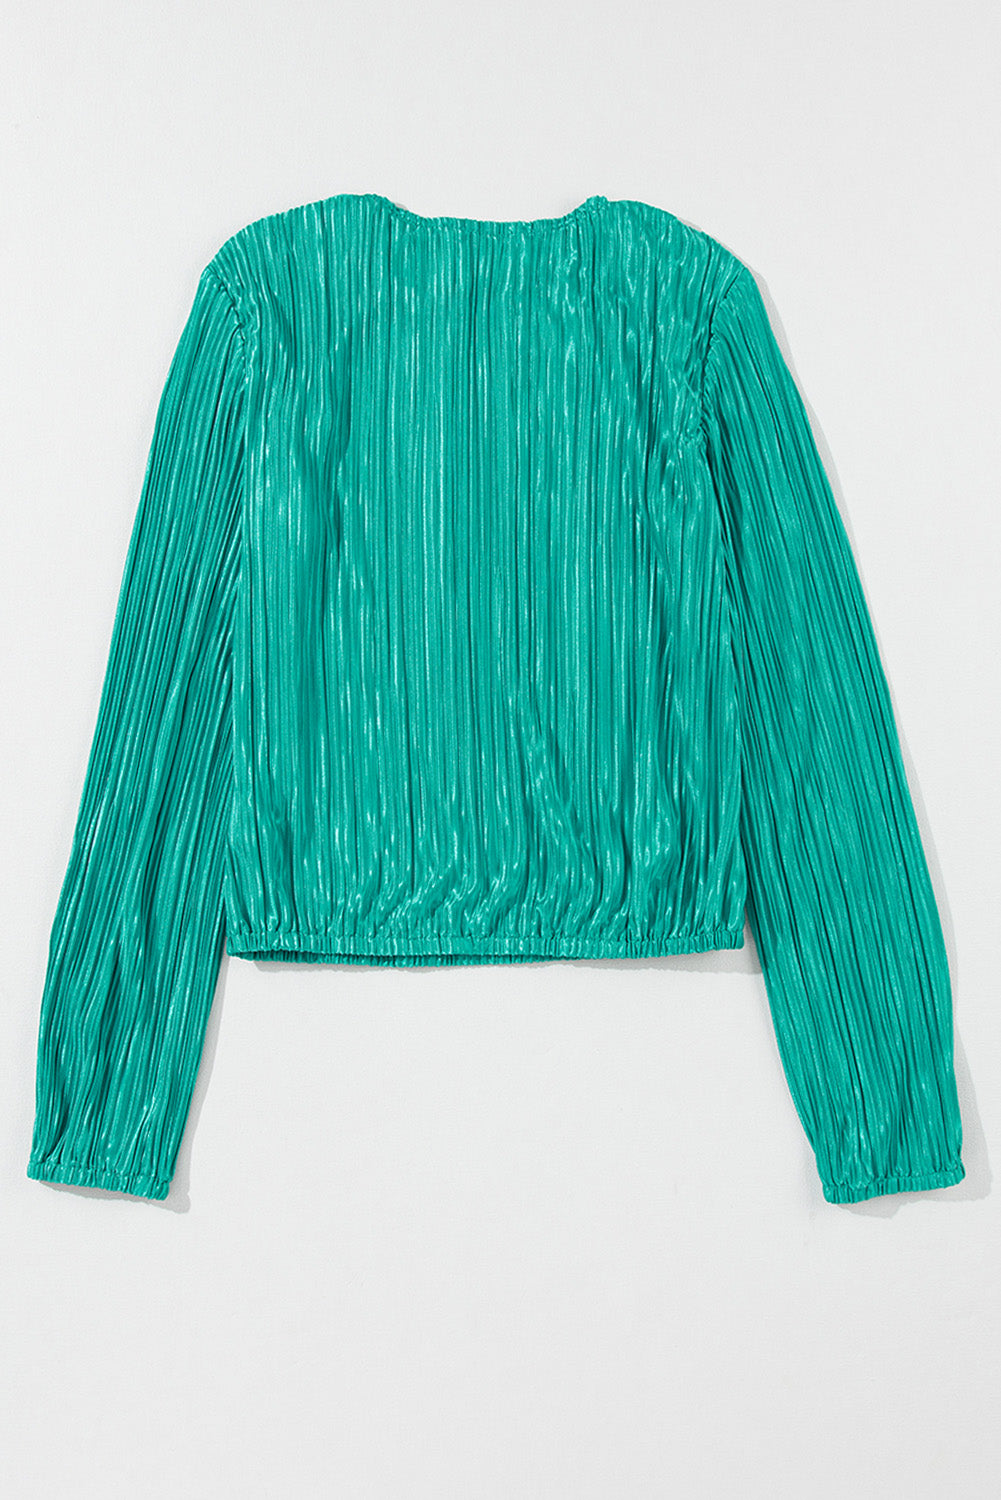 Sea Green Pleated Luster Long Sleeve Top